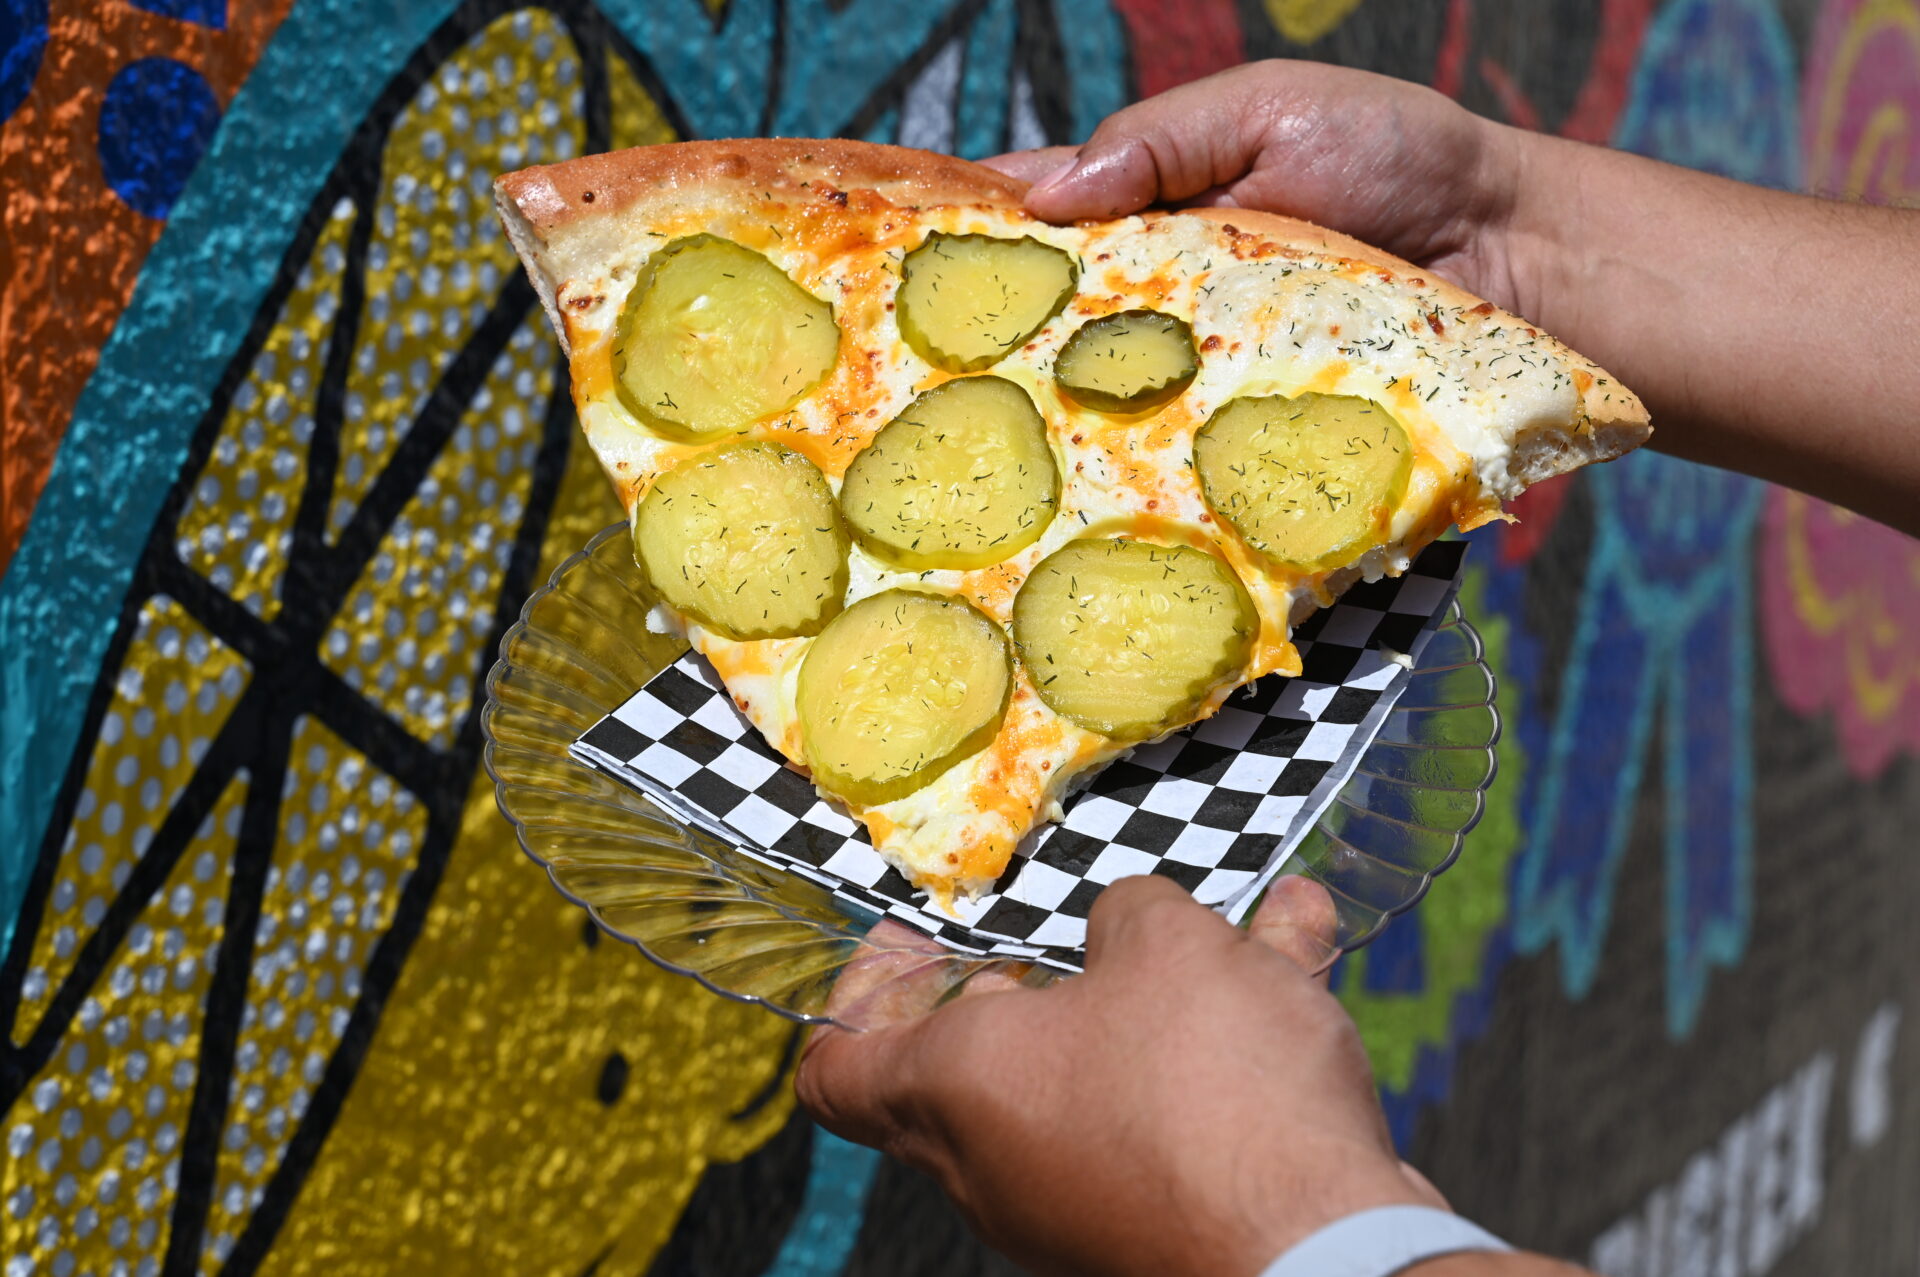 Slice of pickle pizza at the Texas State Fair